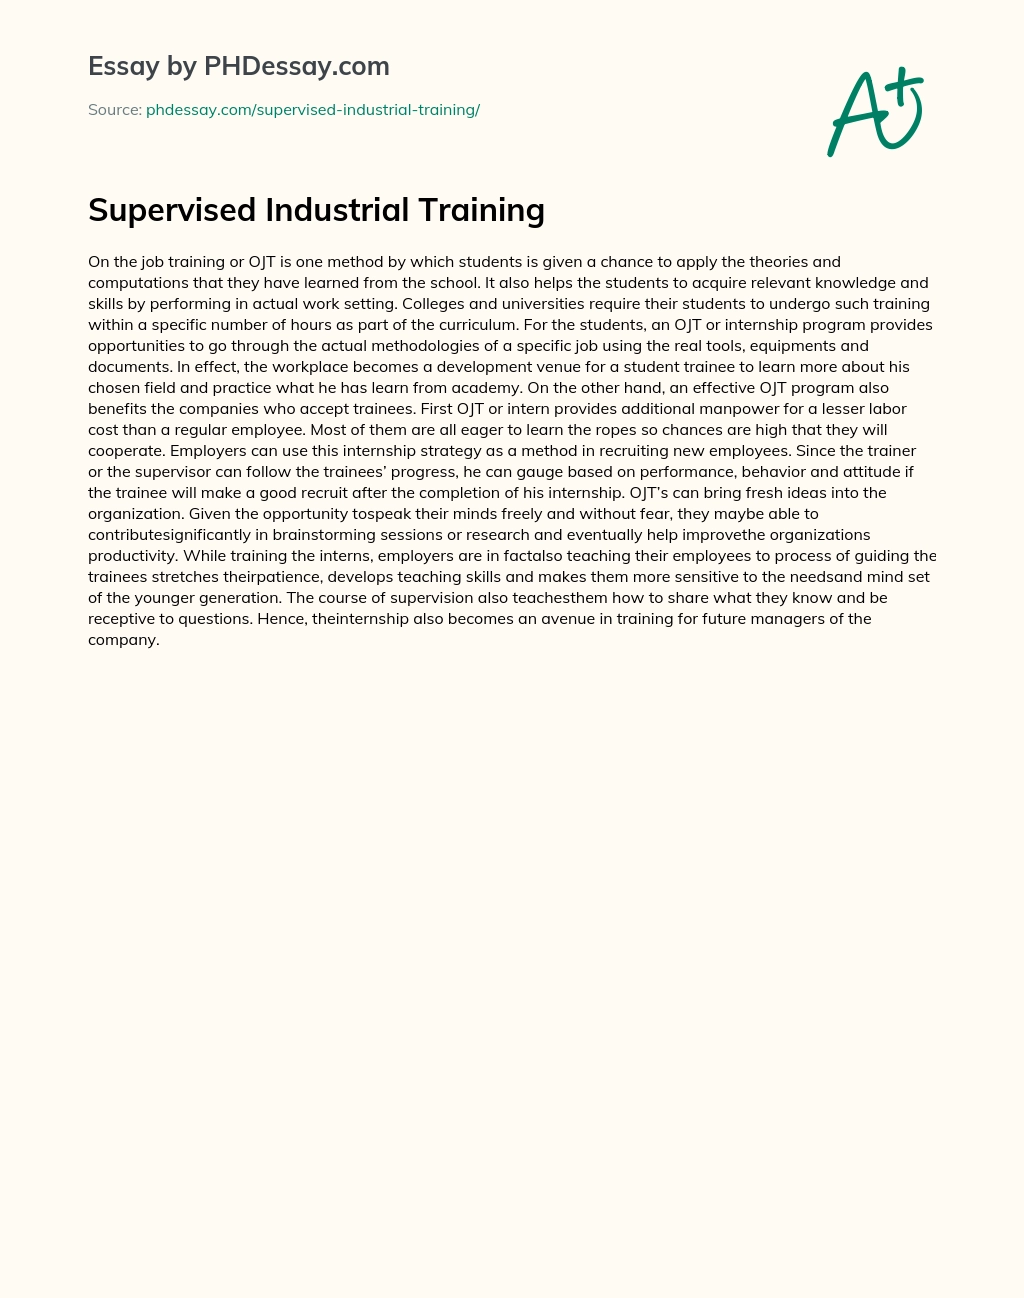 Pdf Structural And Functional Model Of Training Future Masters Of Vocational Training For The Organization Of Teaching And The Production Process In Terms Of Networking Semantic Scholar